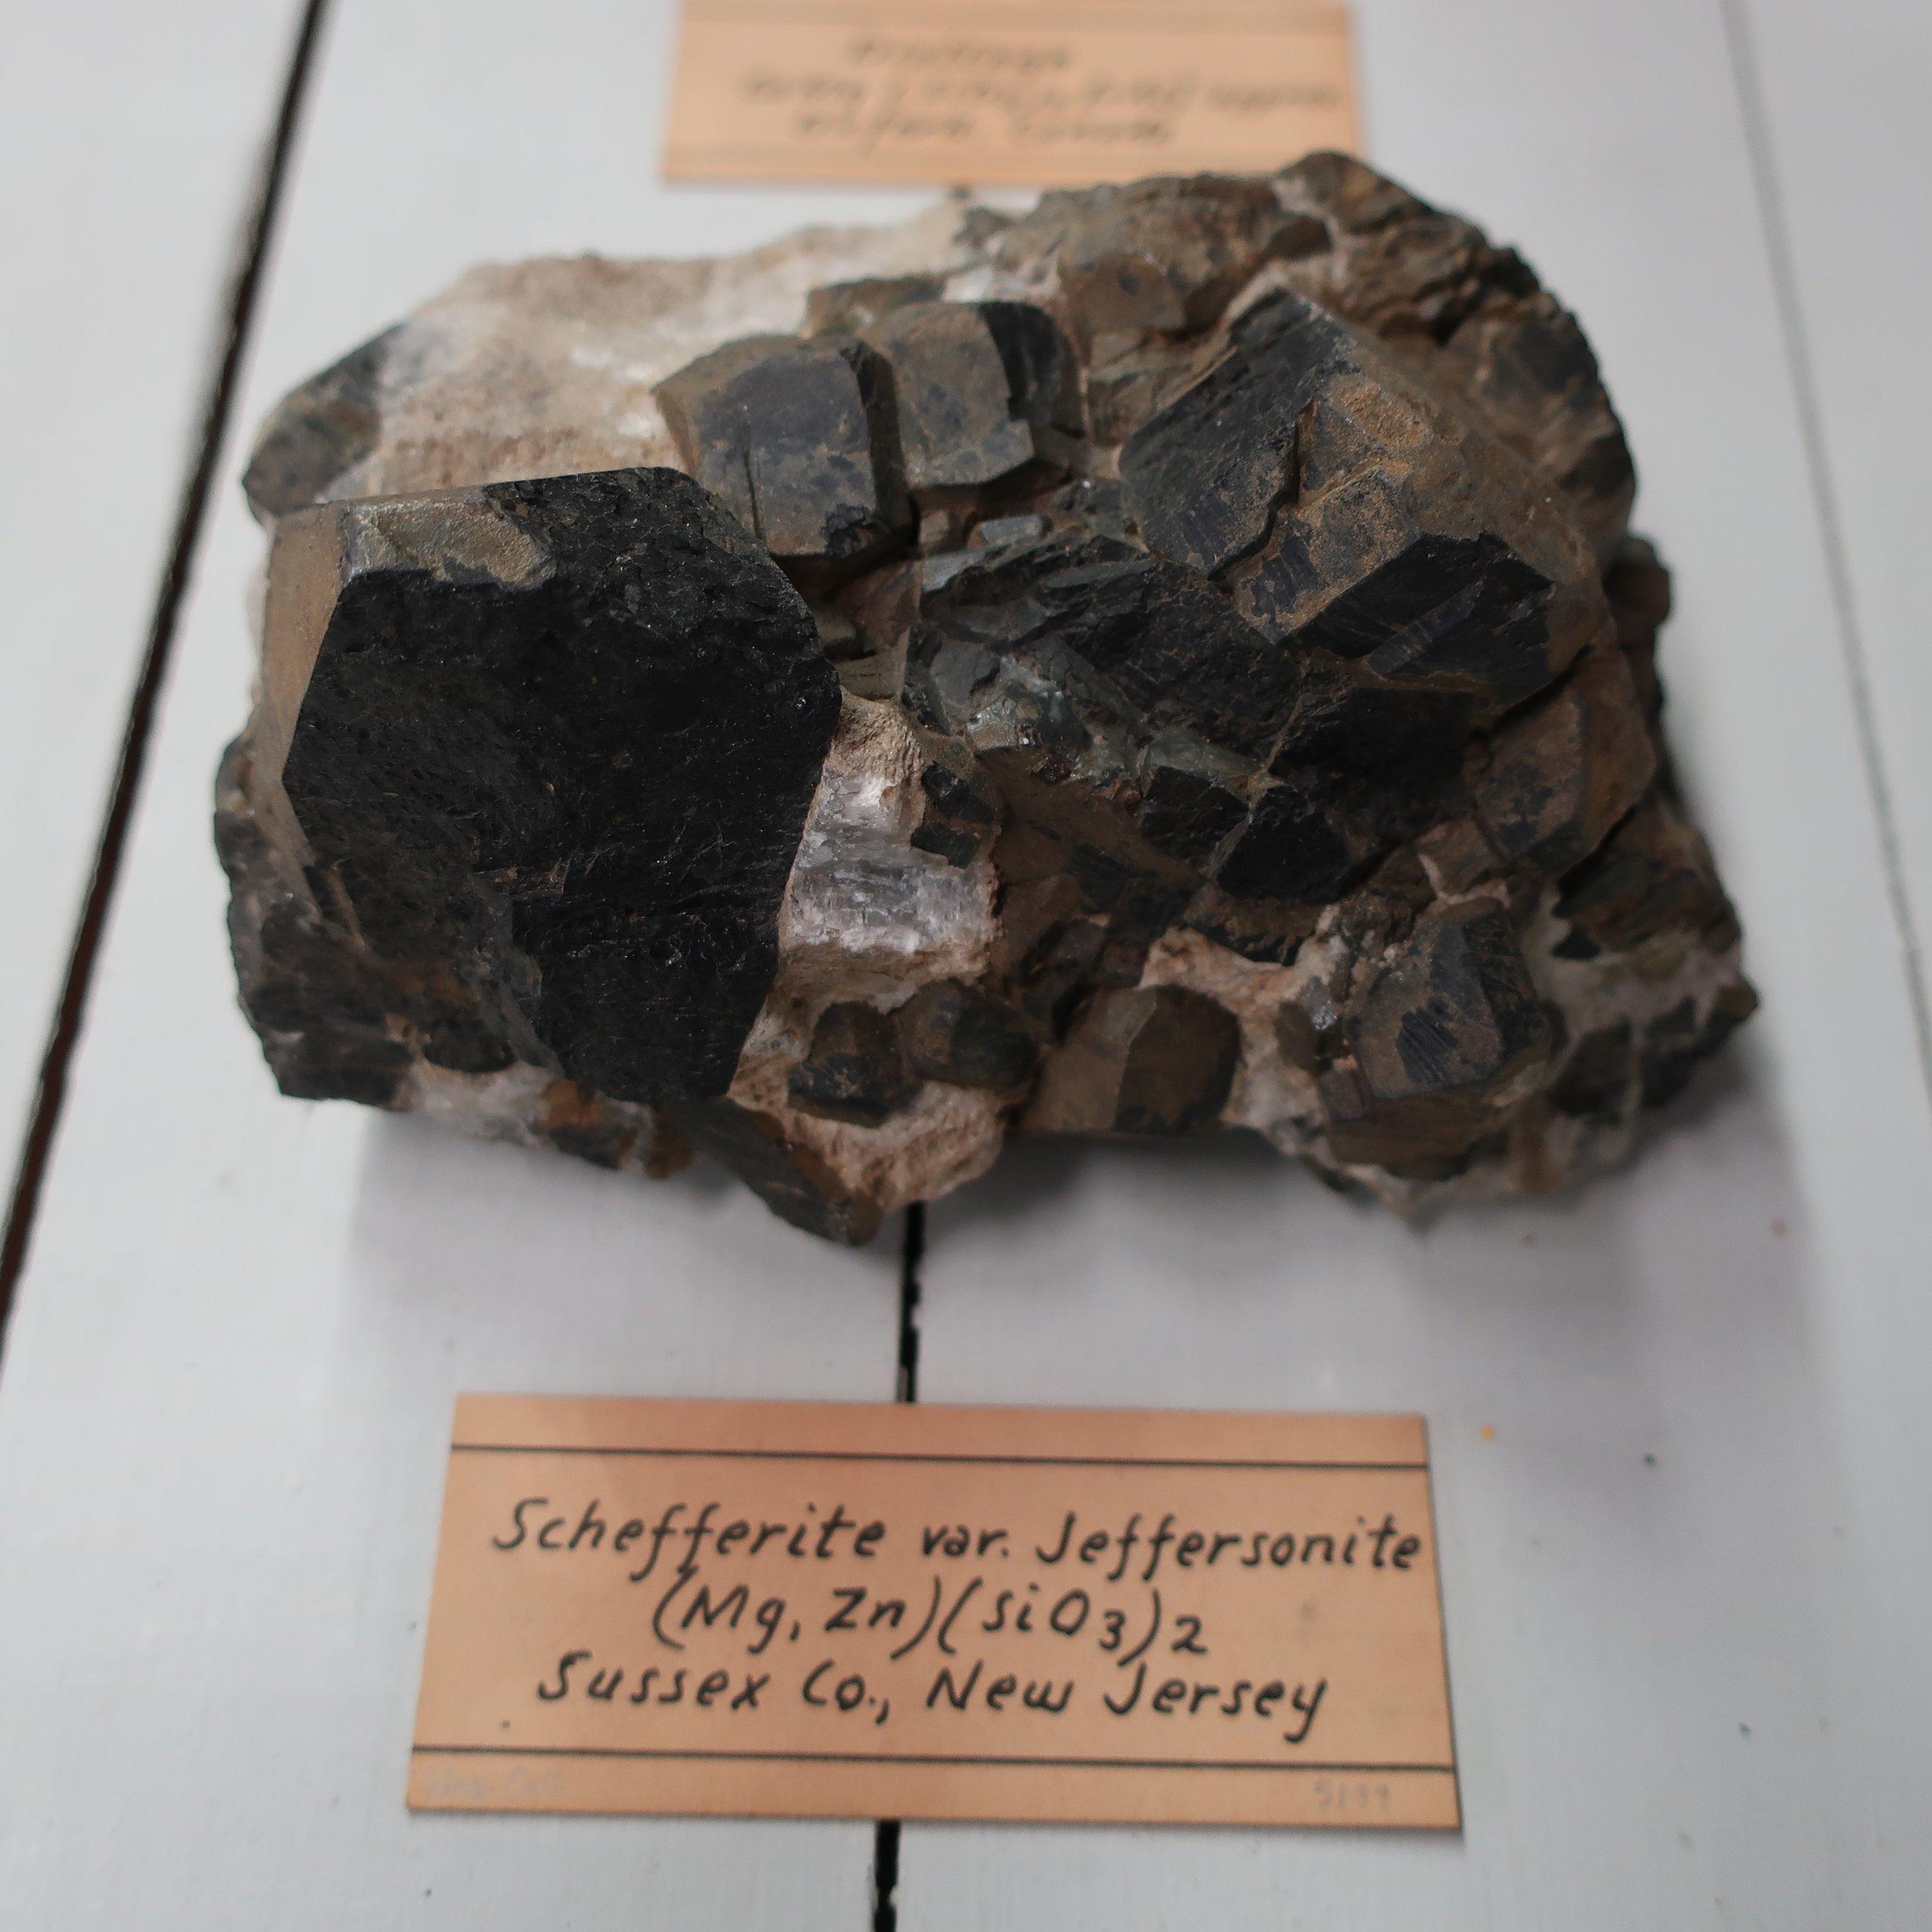   “Jeffersonite  was discovered by Msrs Keating, and Vanuxem of Phil”a from its chemical composition and other characters, they came to the conclusion it was a new species. Dr. Troost instituted a careful comparison between this mineral, and pyroxene